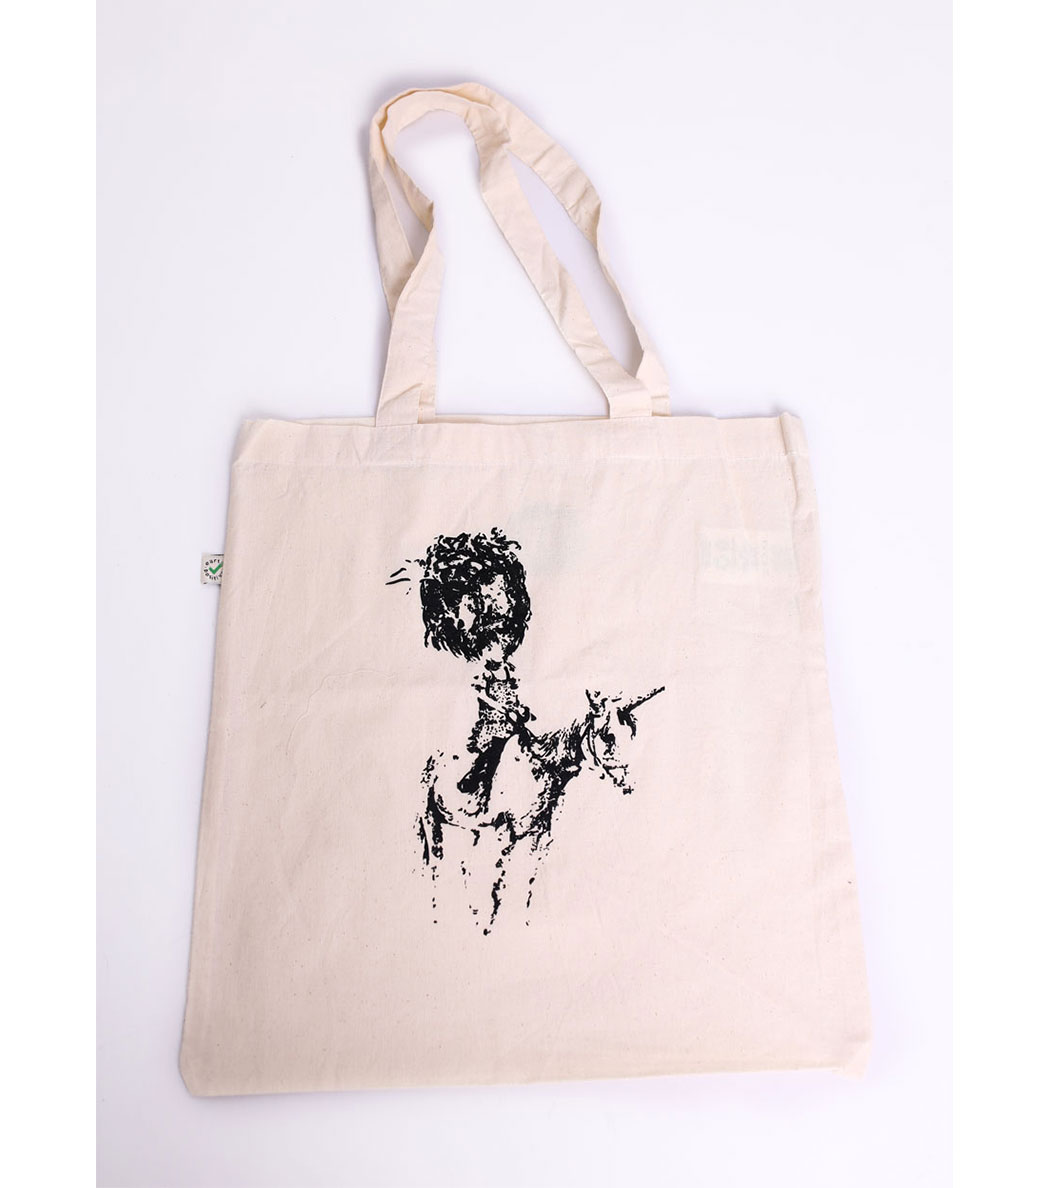 JESUS ON A DONKEY CLASSIC SHOPPER TOTE BAG - Belly Of Jonah